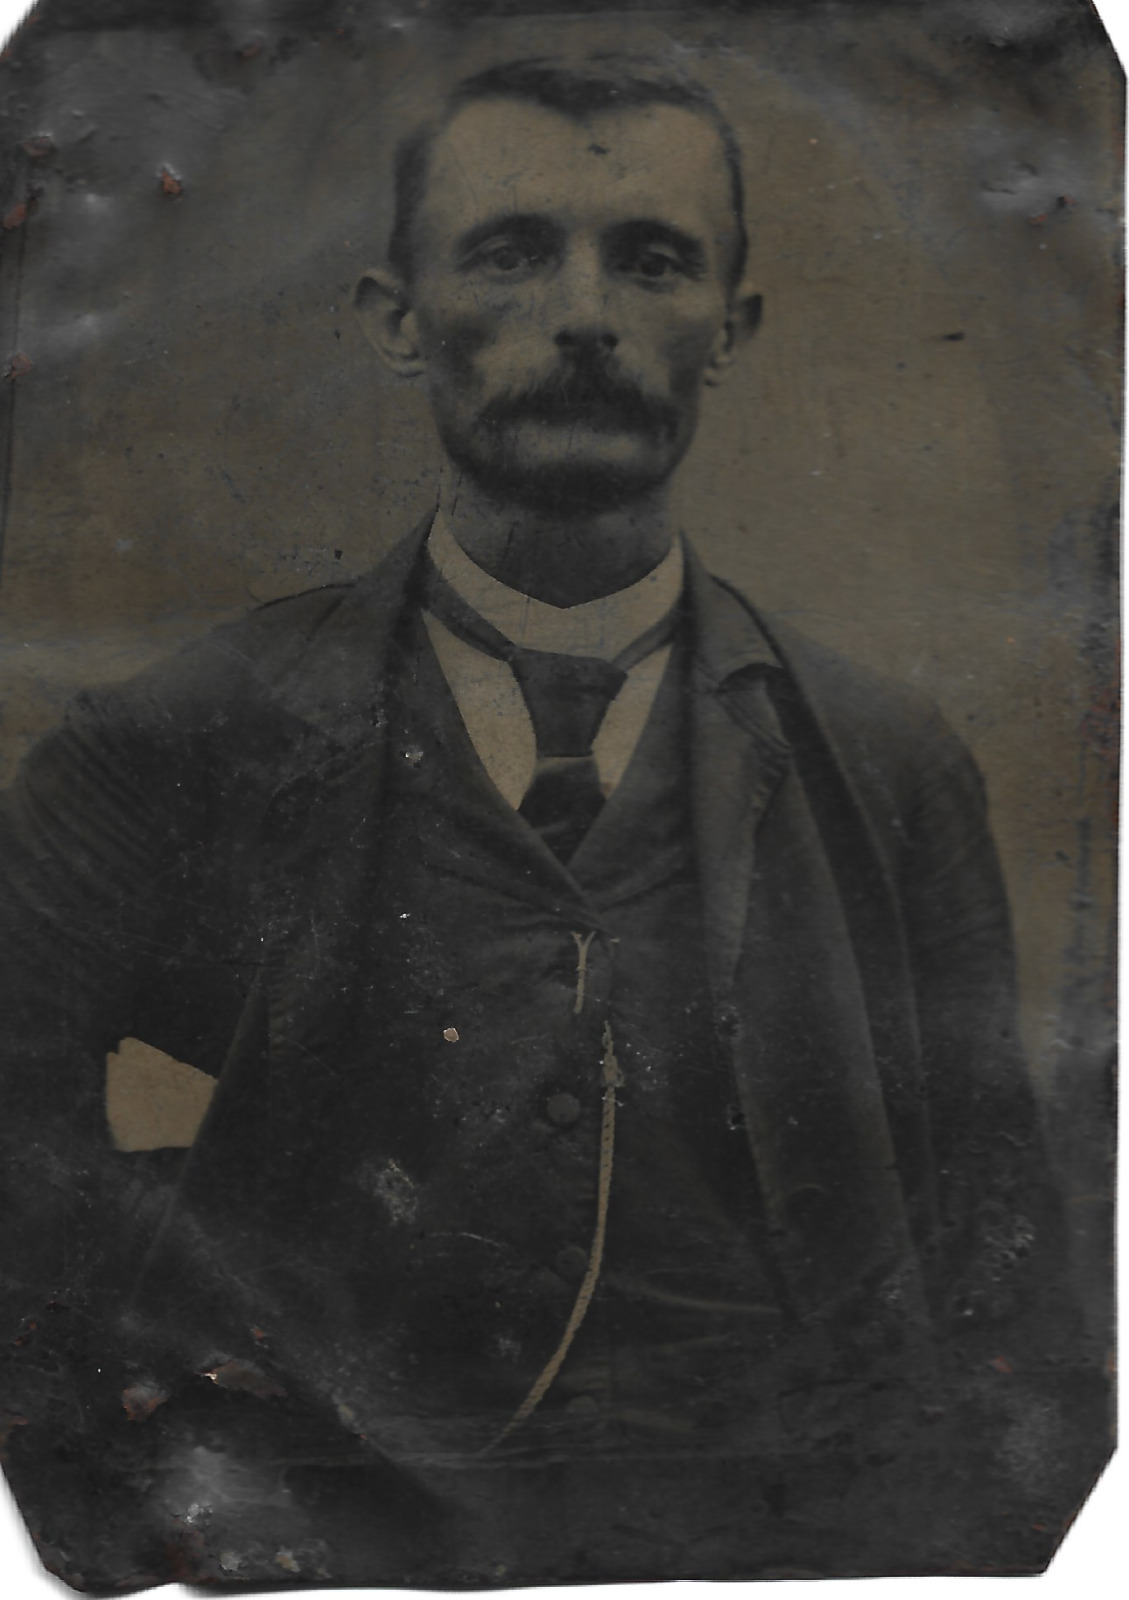 Tintype, Man, Very Possibly Doc Holliday, OK Corral, Face-Match